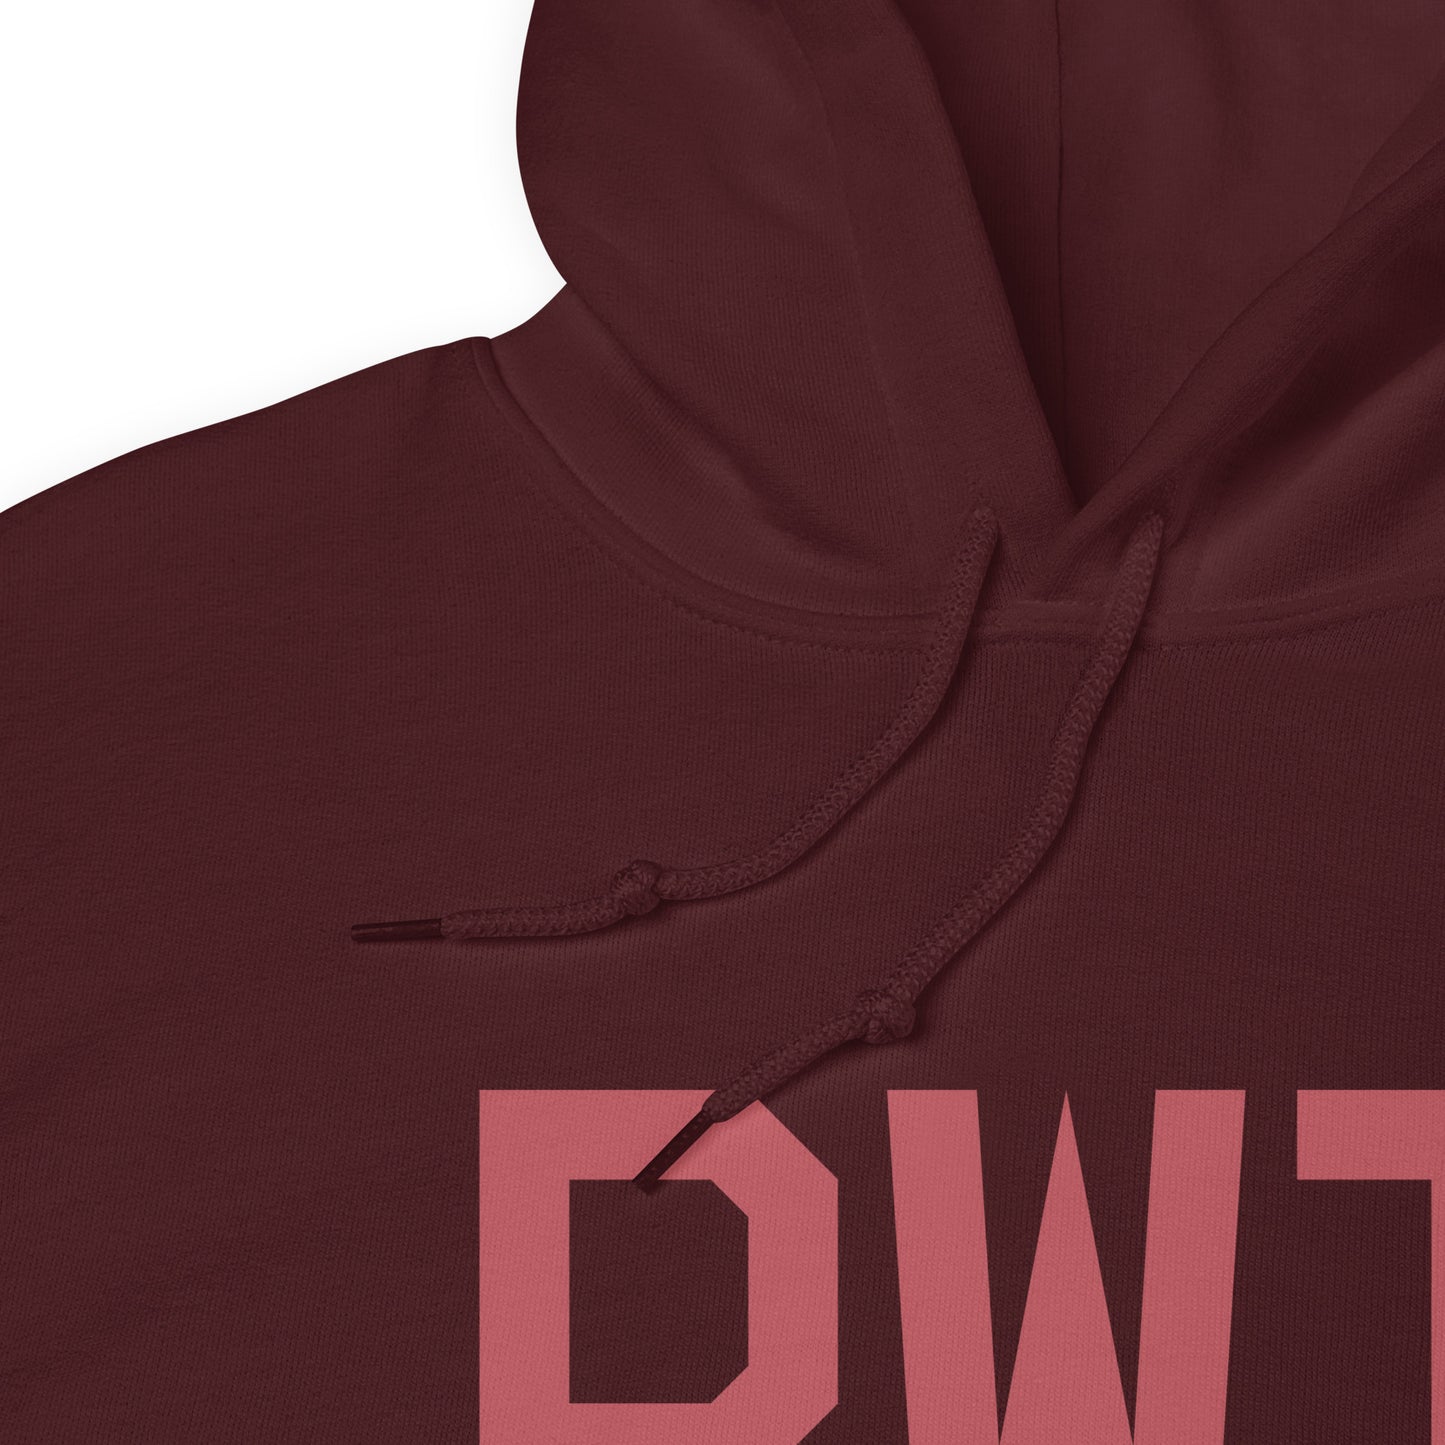 Aviation Enthusiast Hoodie - Deep Pink Graphic • BWI Baltimore • YHM Designs - Image 08